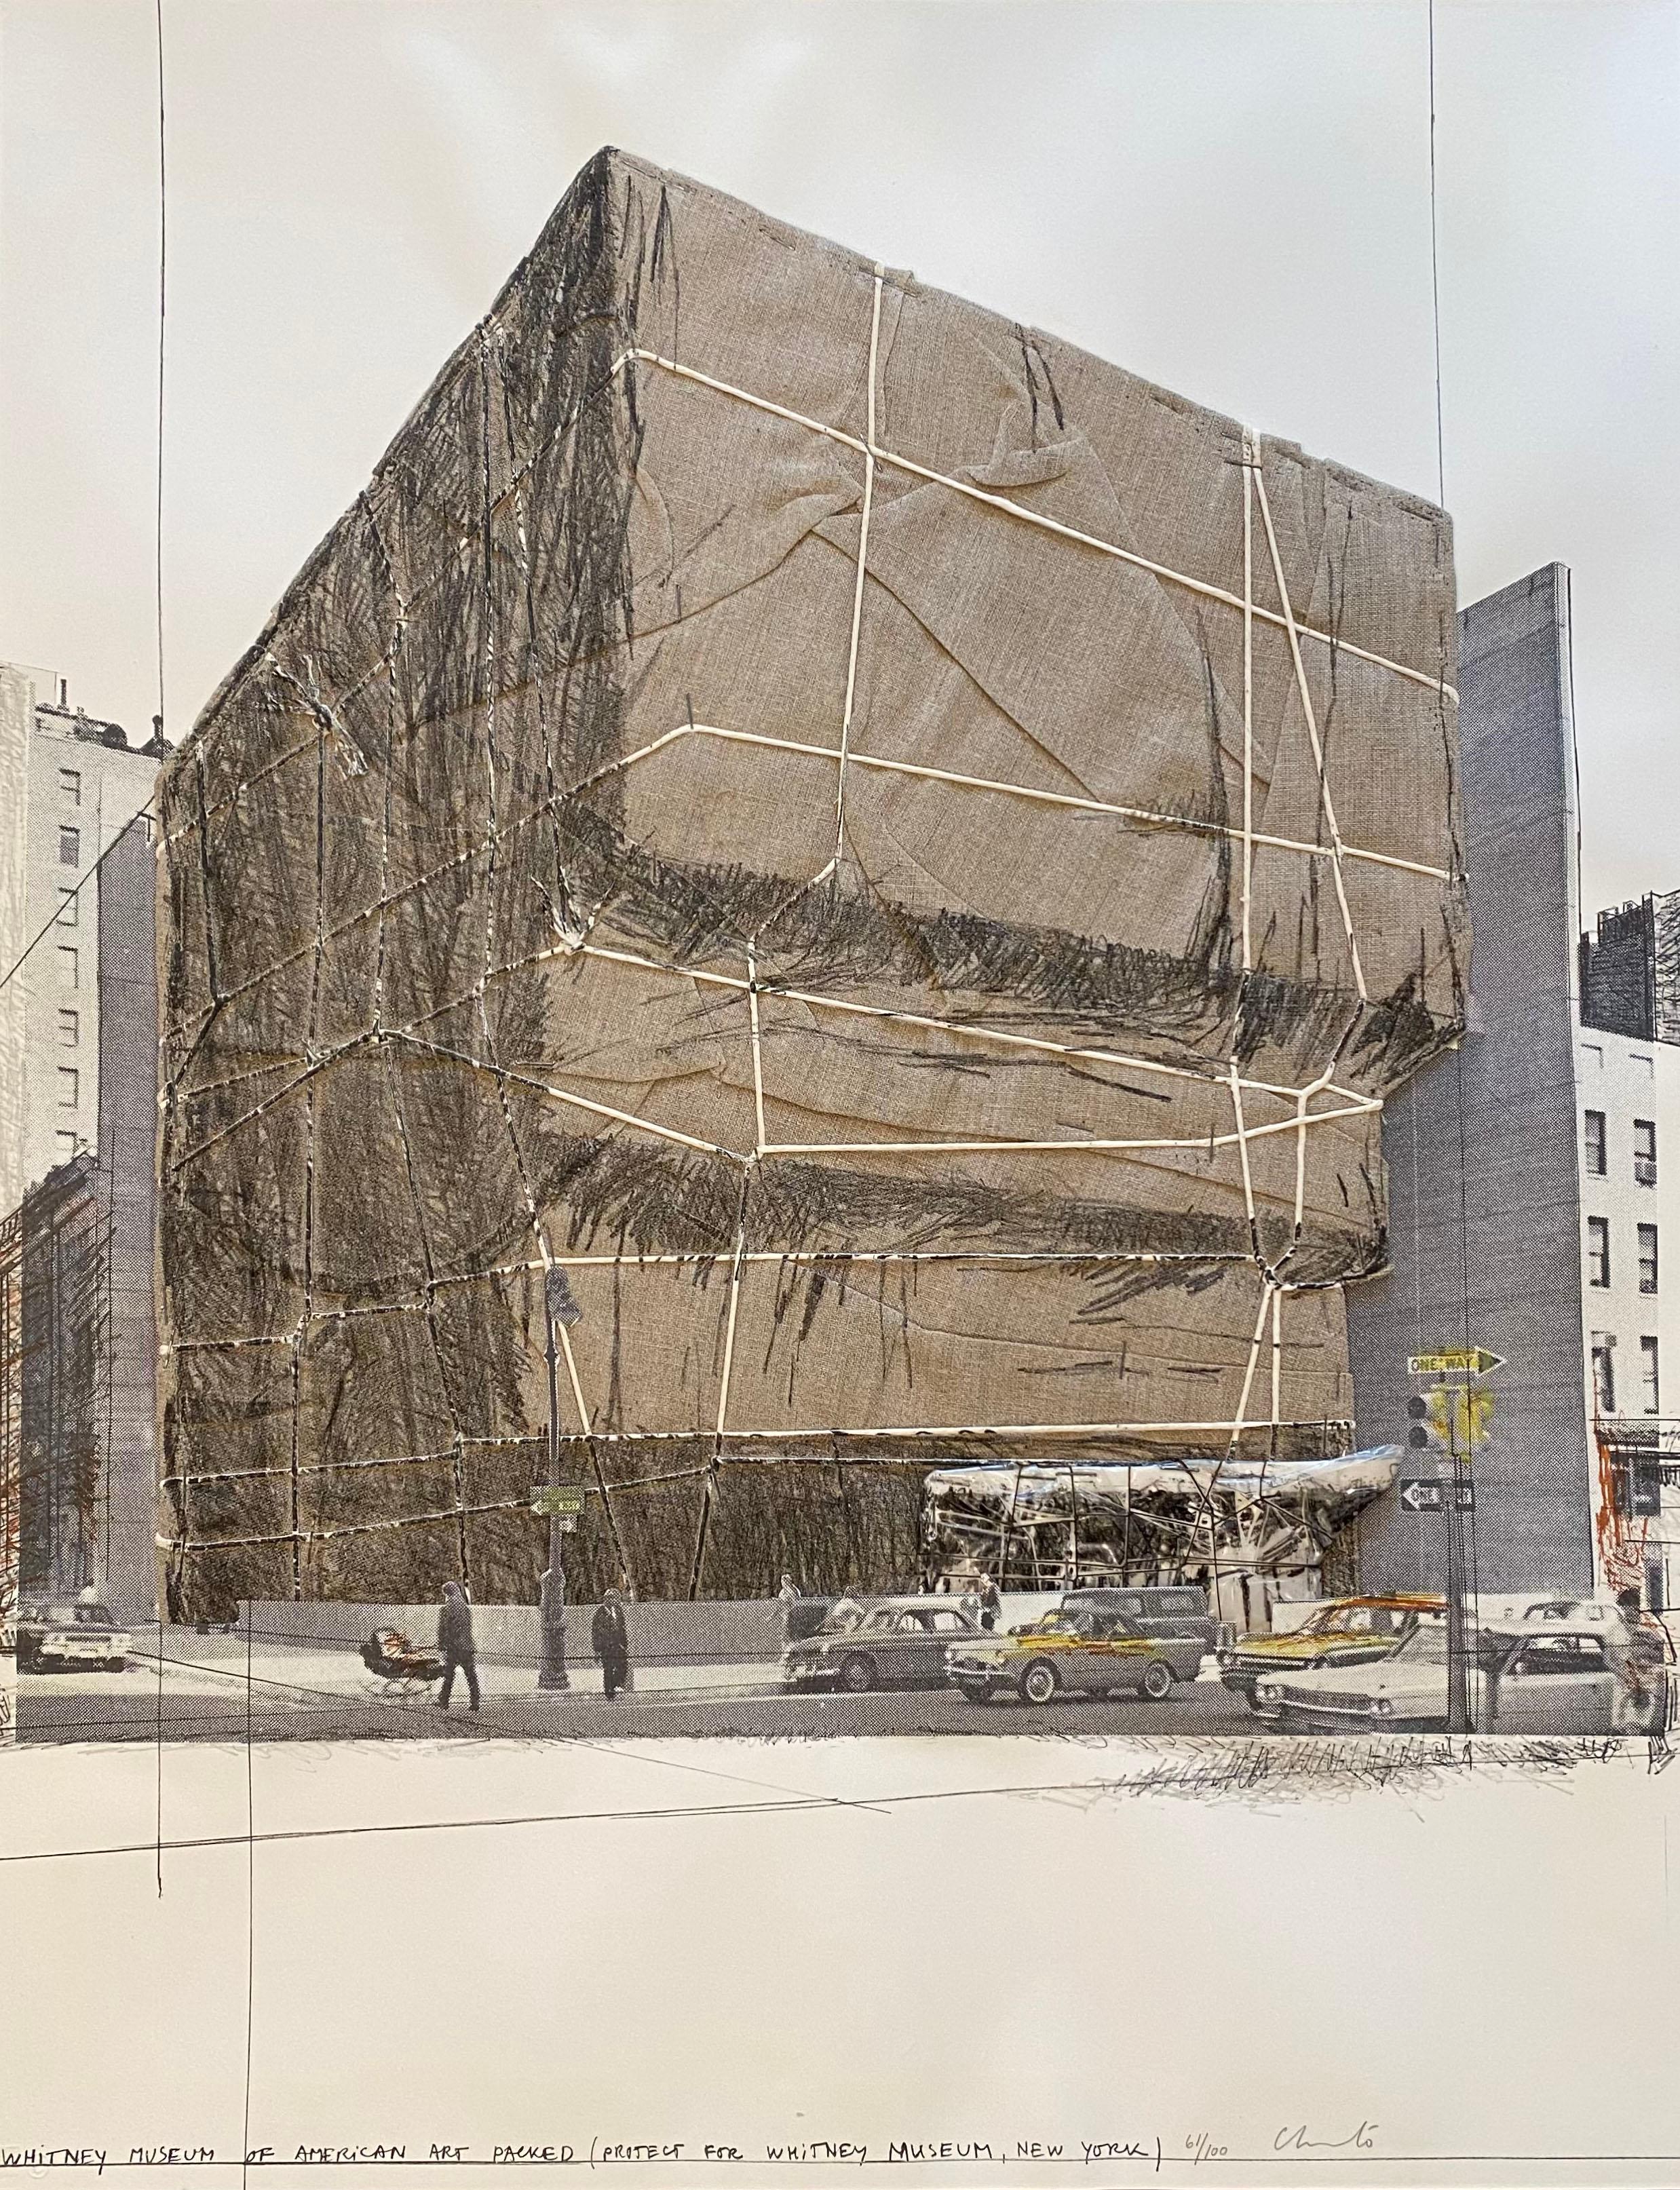 Christo and Jeanne-Claude Landscape Print - Whitney Museum of American Art, Packed, Project for New York